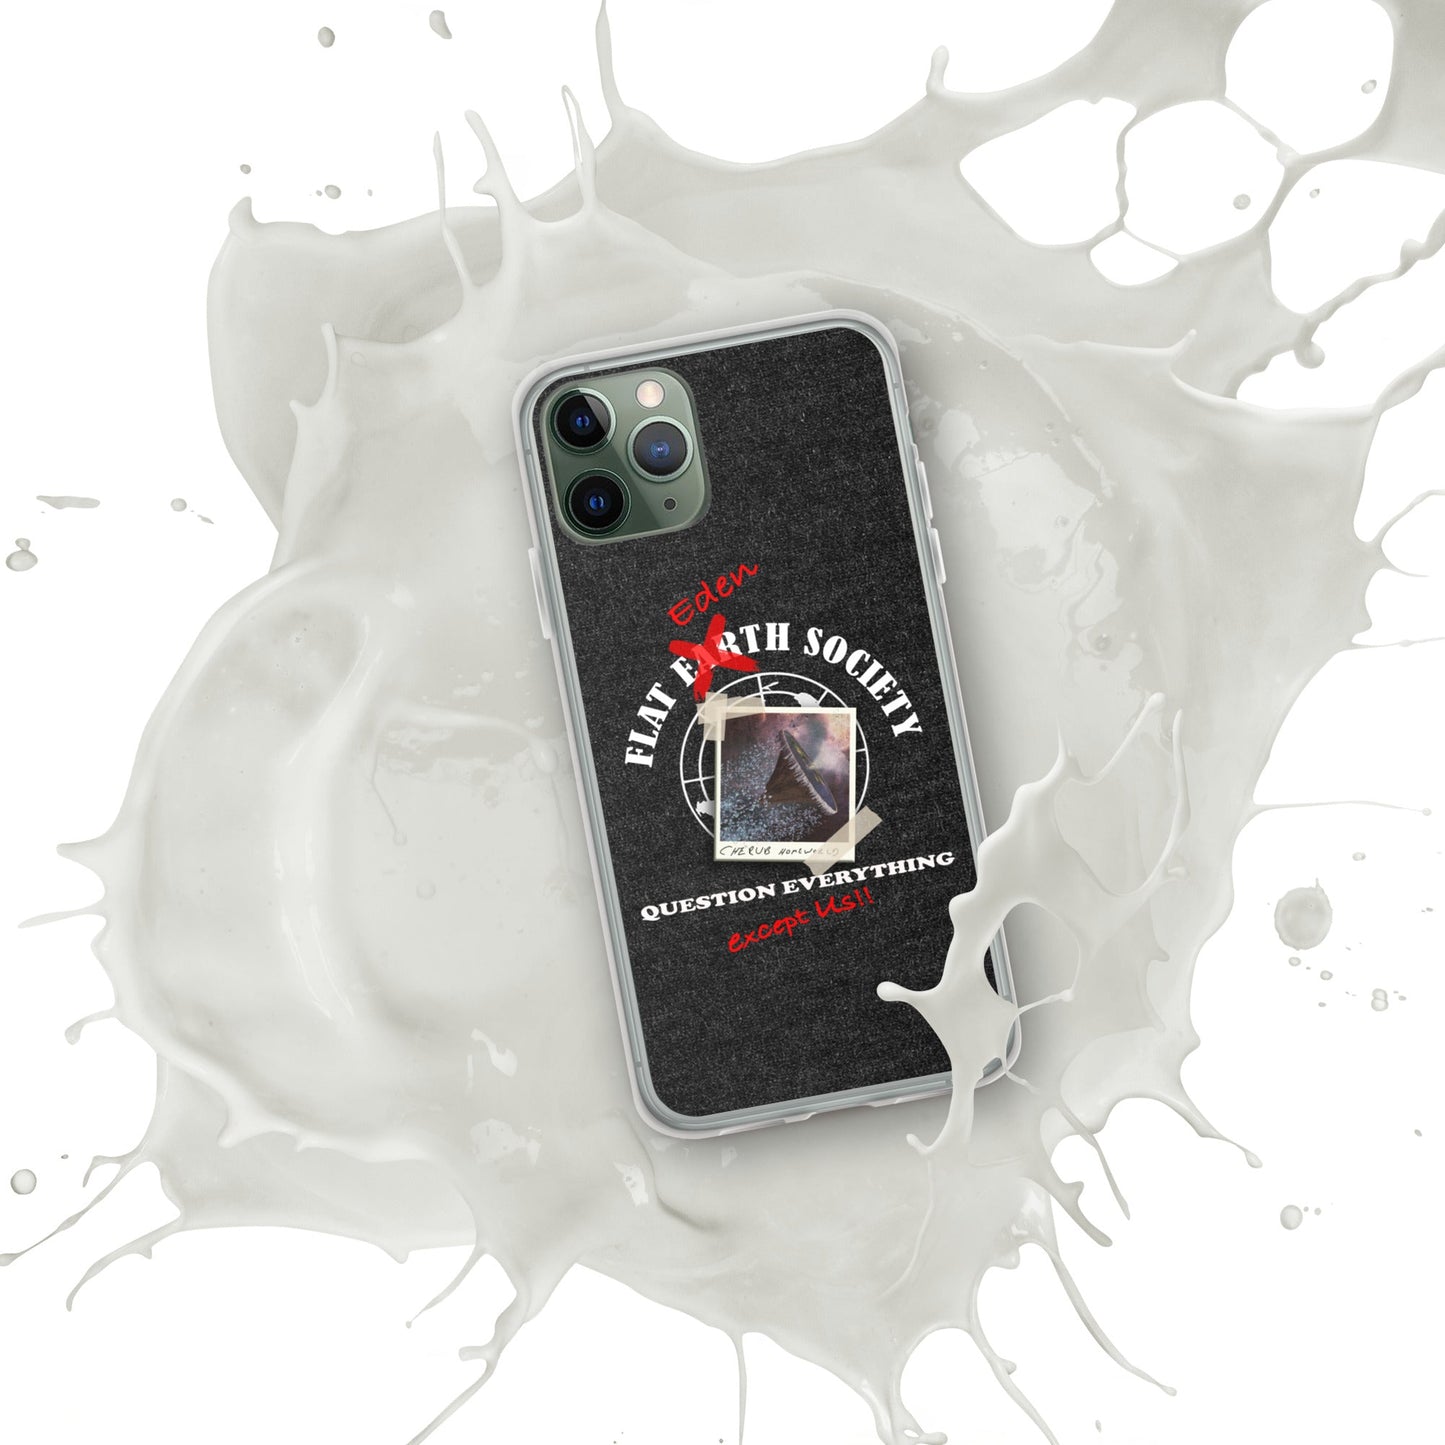 iPhone Case | Intergalactic Space Force 2 | Flat Eden Society - Spectral Ink Shop - Mobile Phone Cases -9780728_10995